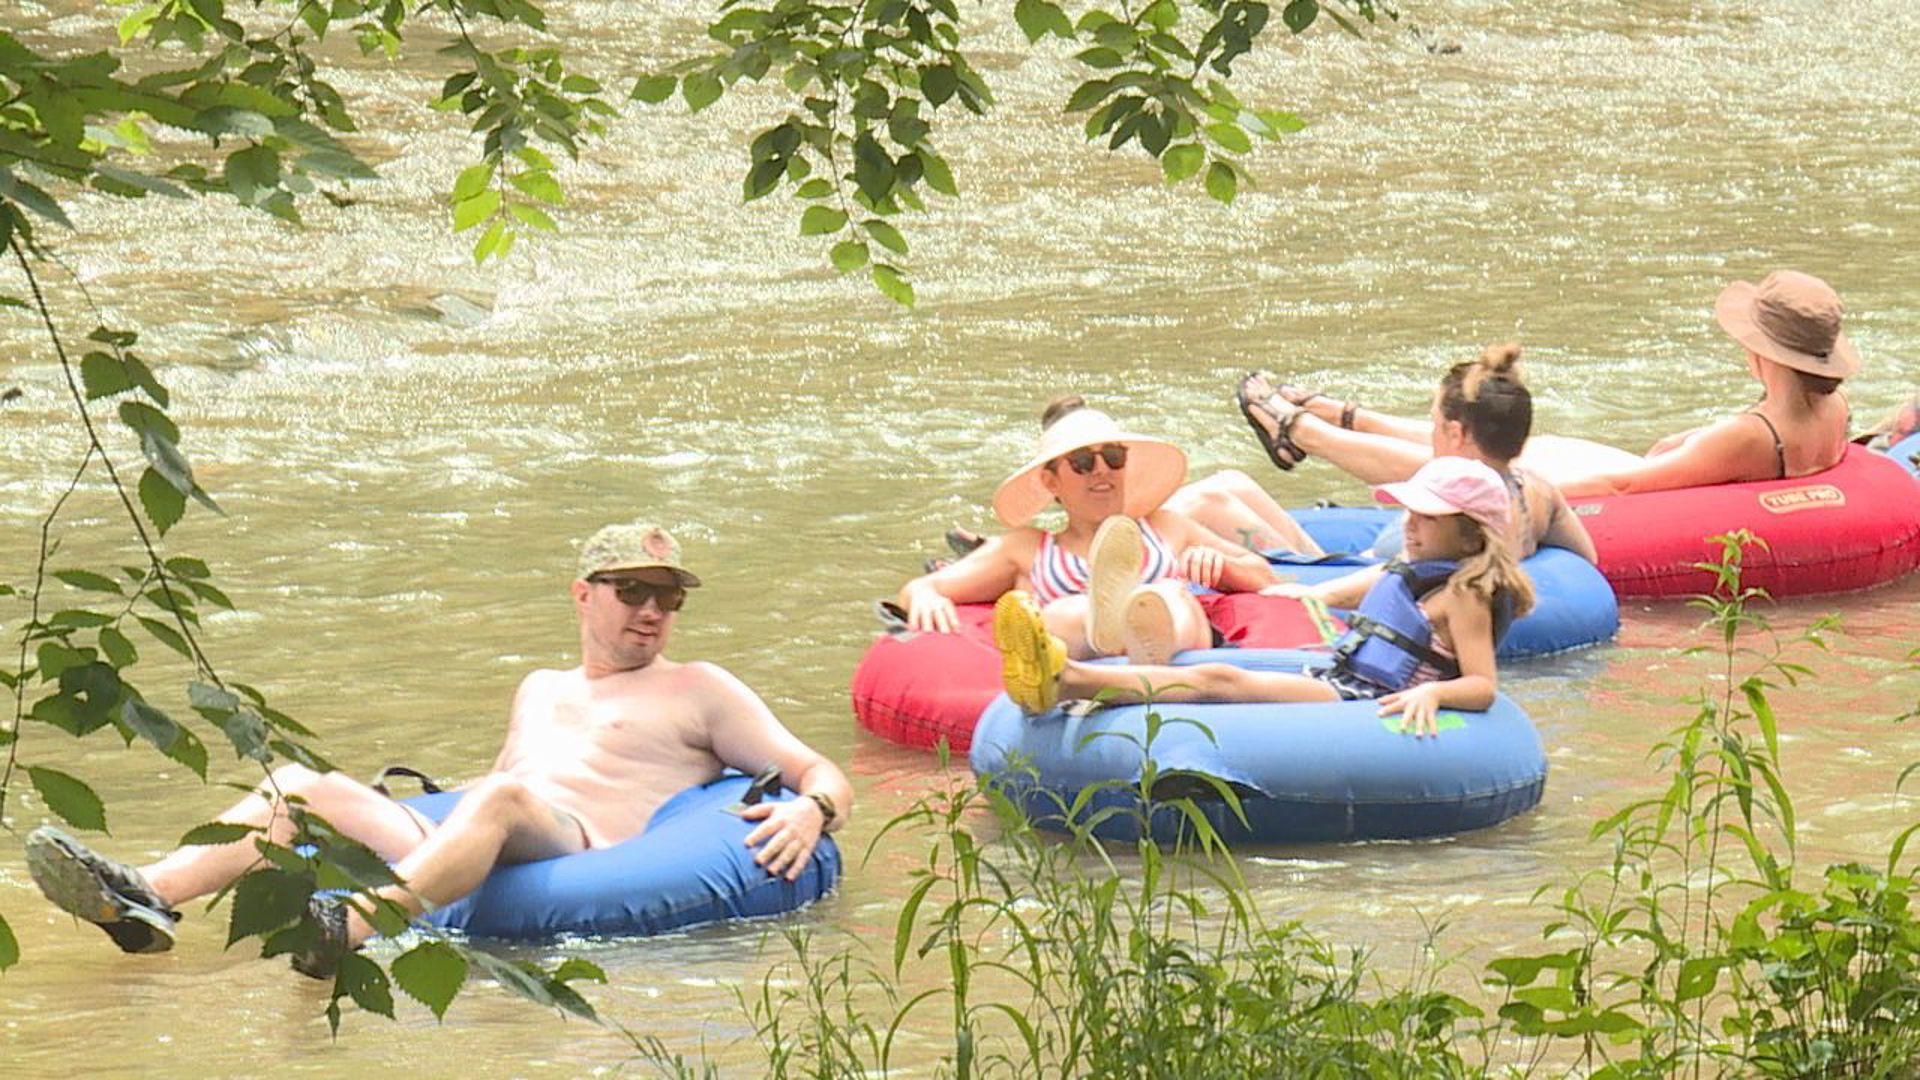 Sickman's Mill in Lancaster County offers creek tubing plus much more for people in search of a unique summer activity.